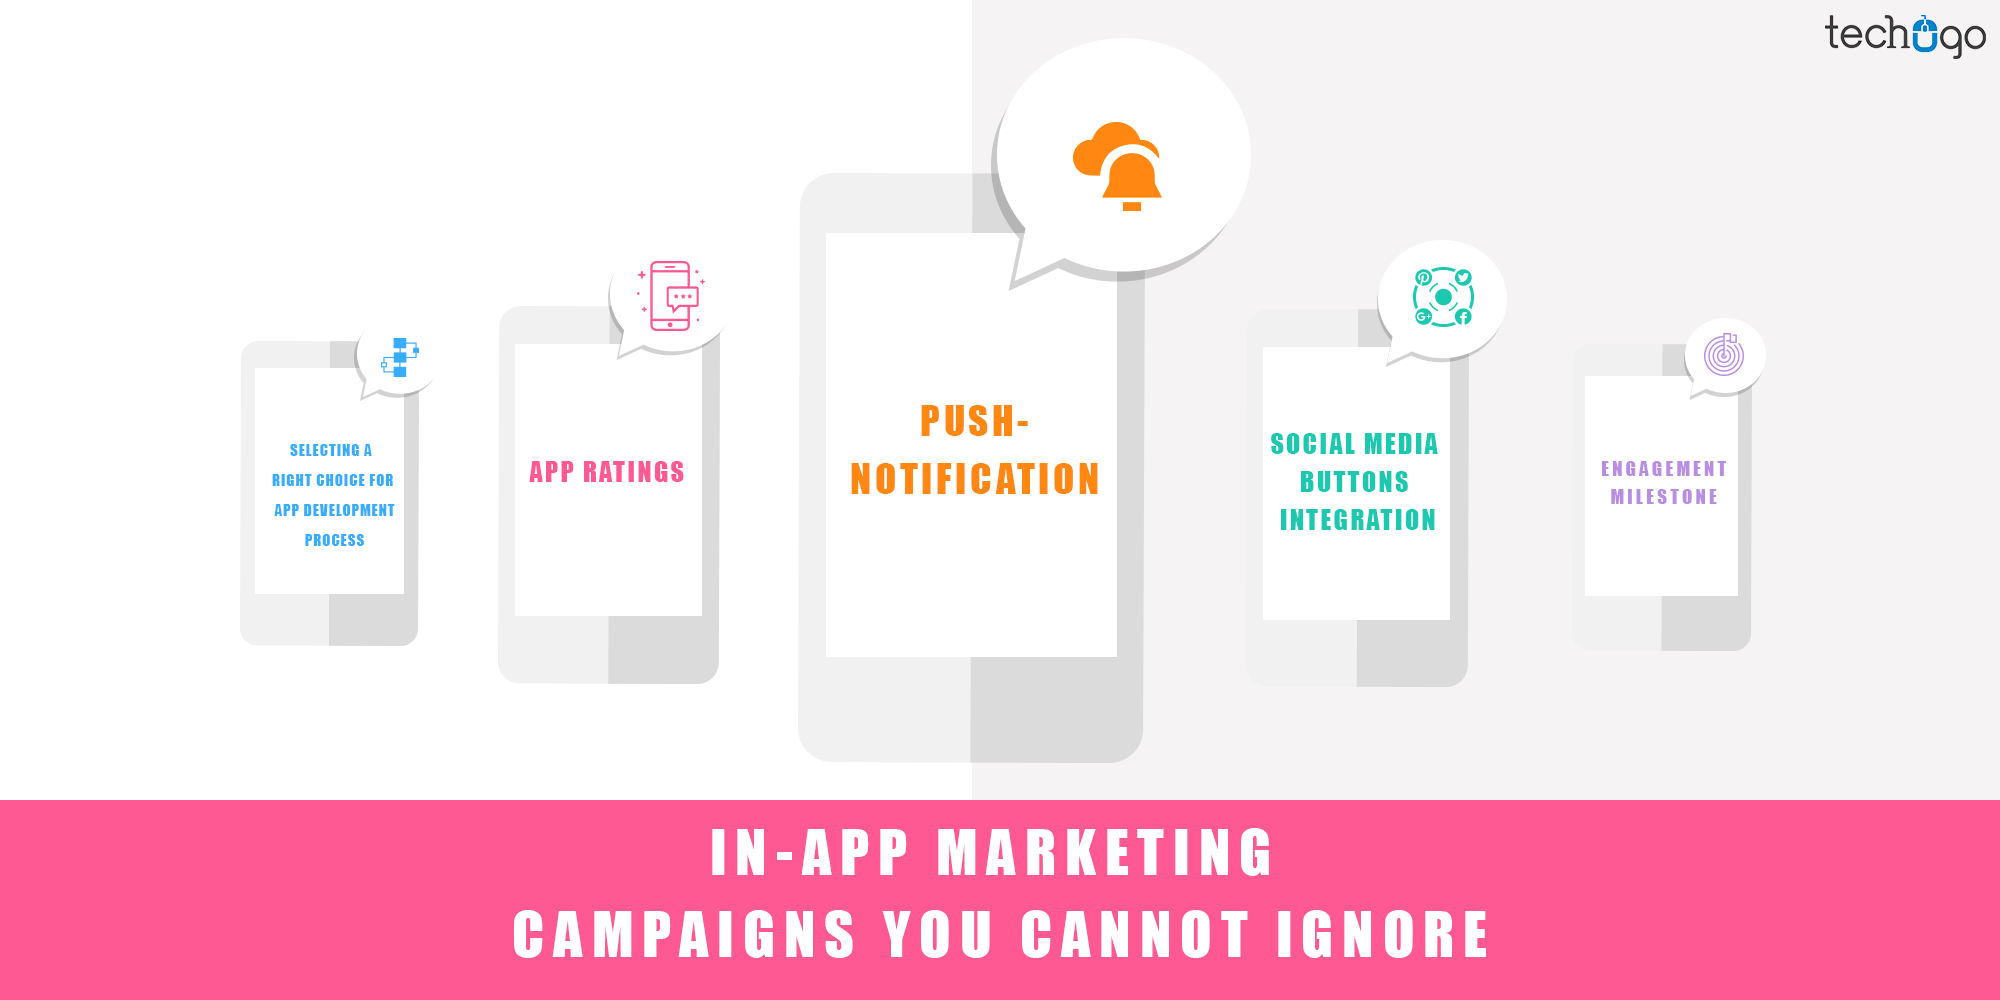 In-App Marketing Campaigns You Cannot Ignore